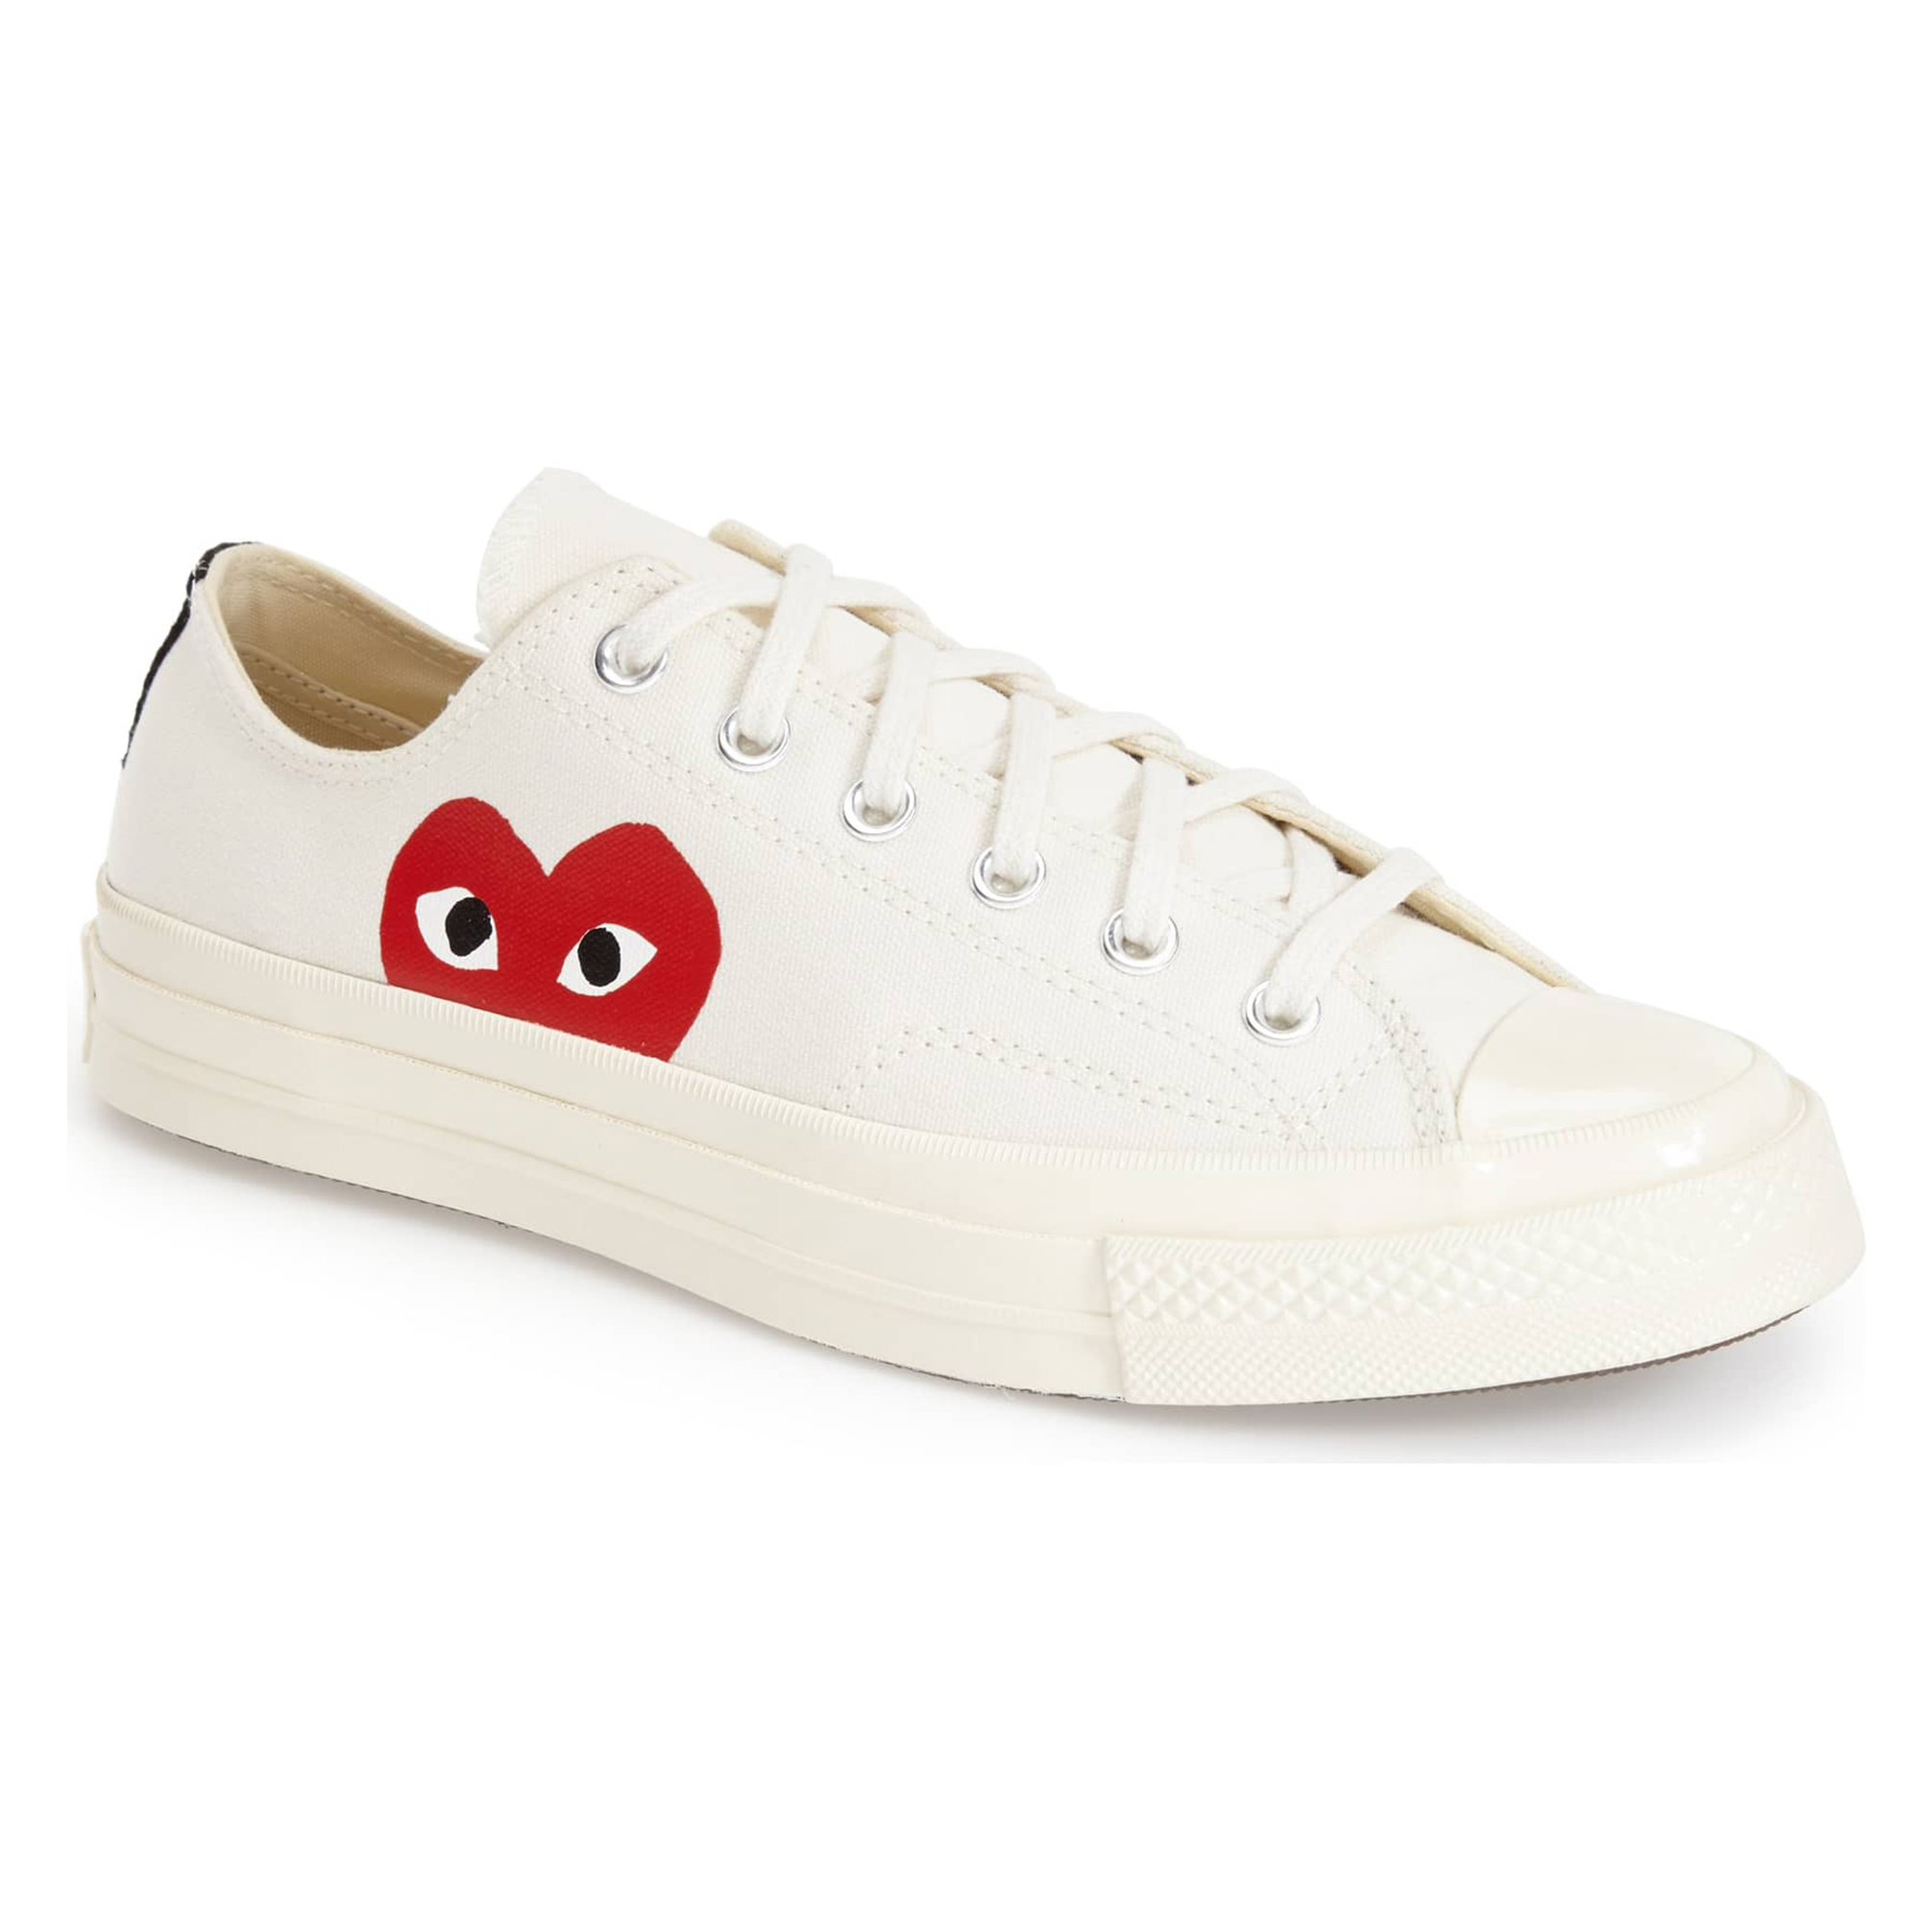 Impossible Splendor expiration This Converse X Comme des Garcons Sneaker Is Too Cute